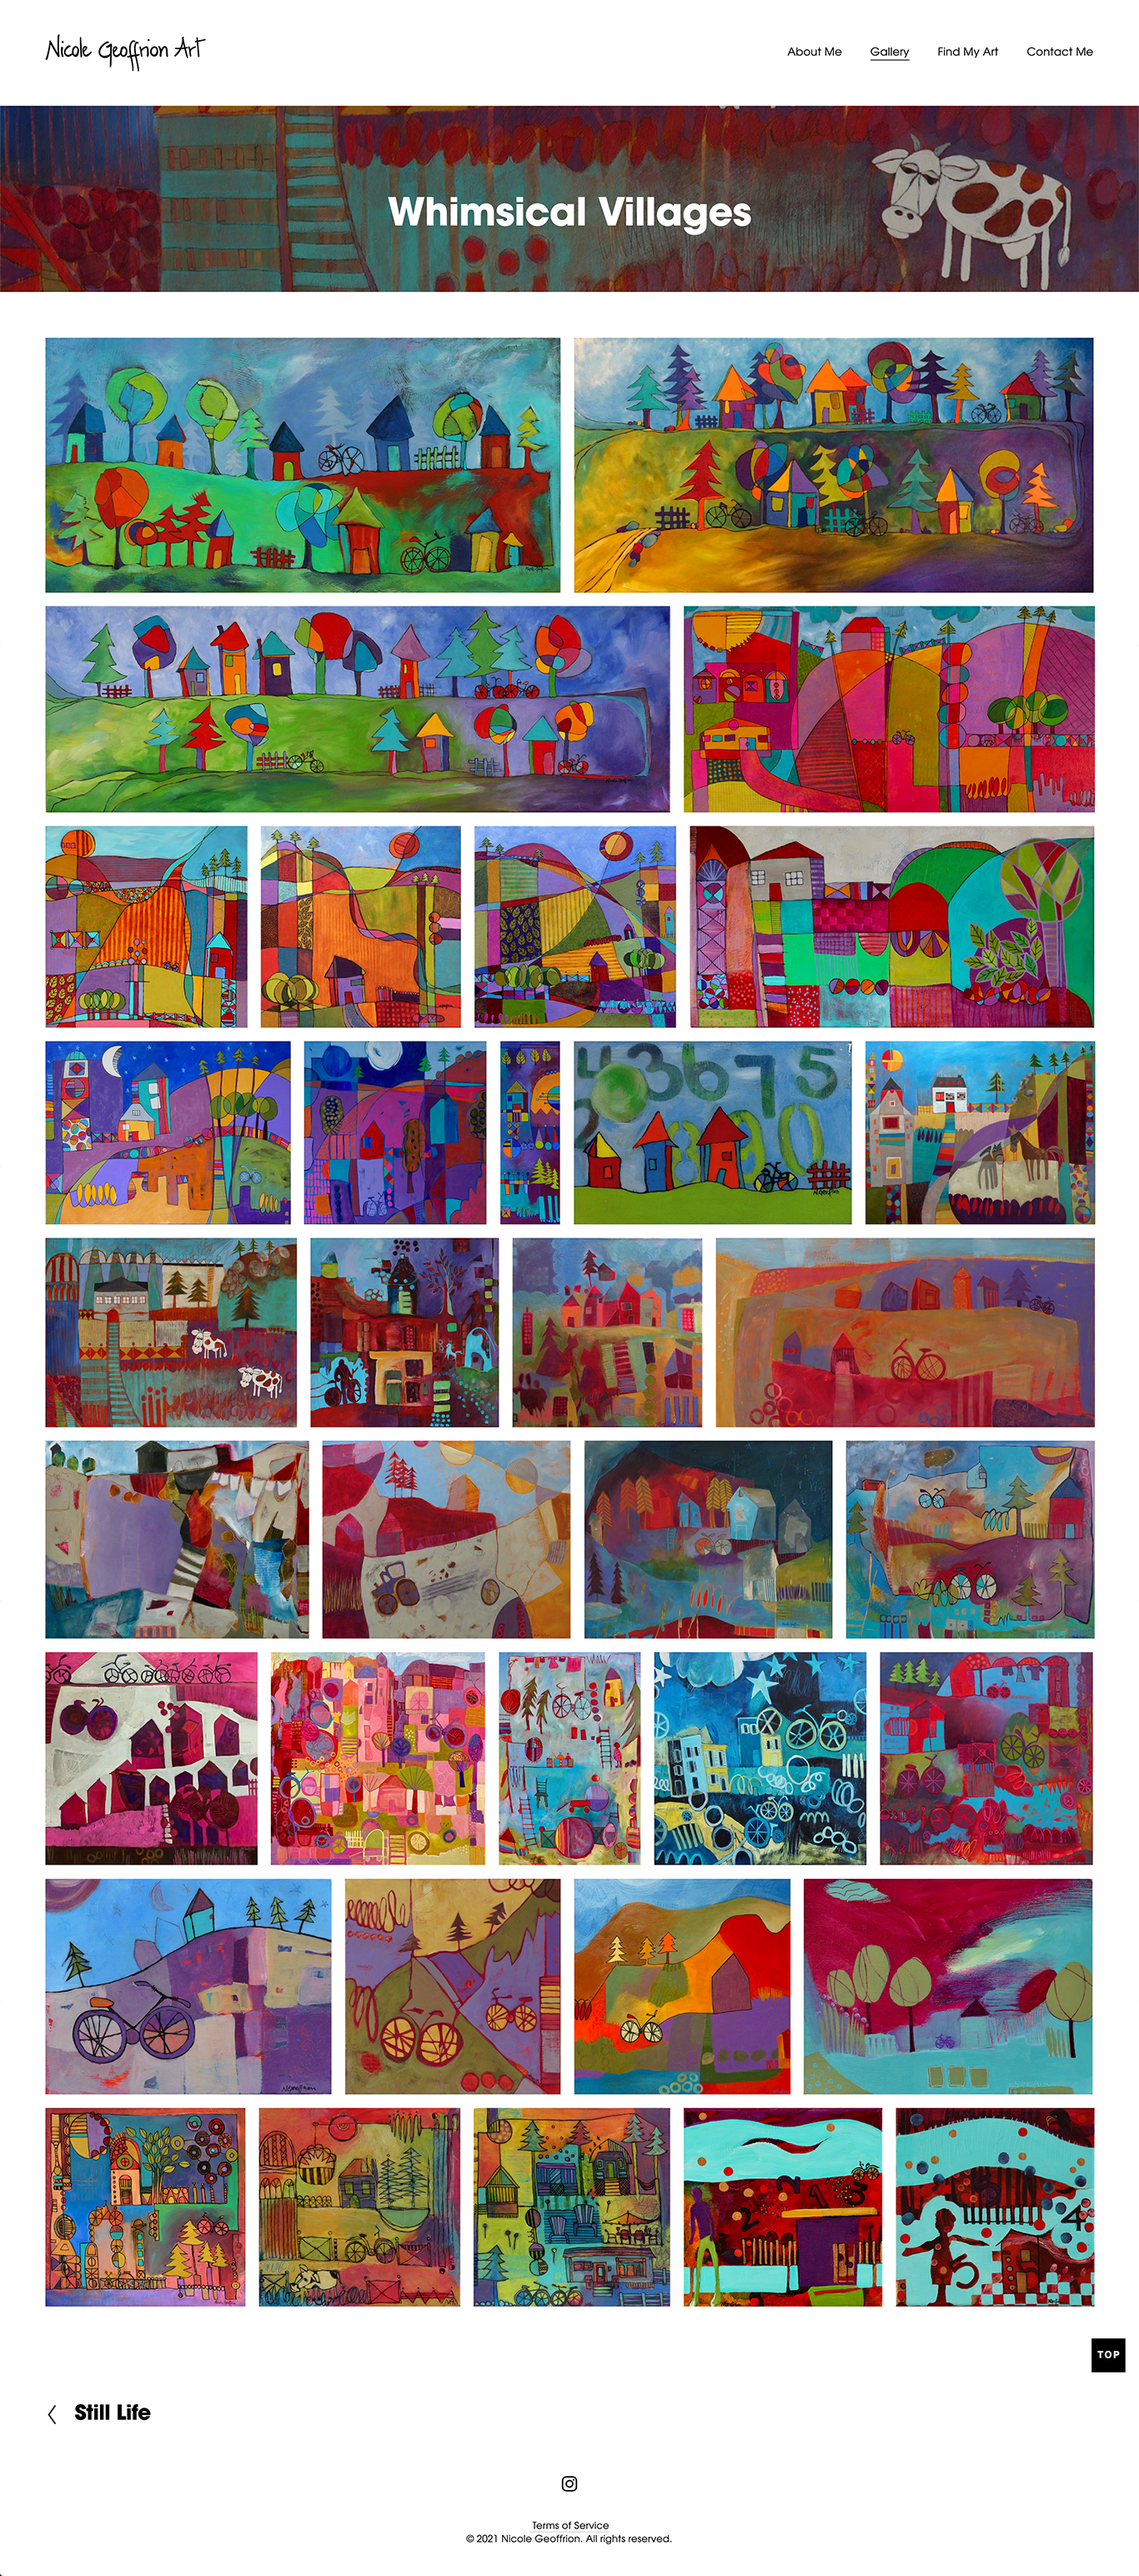 Whimsical Villages Category of the Gallery